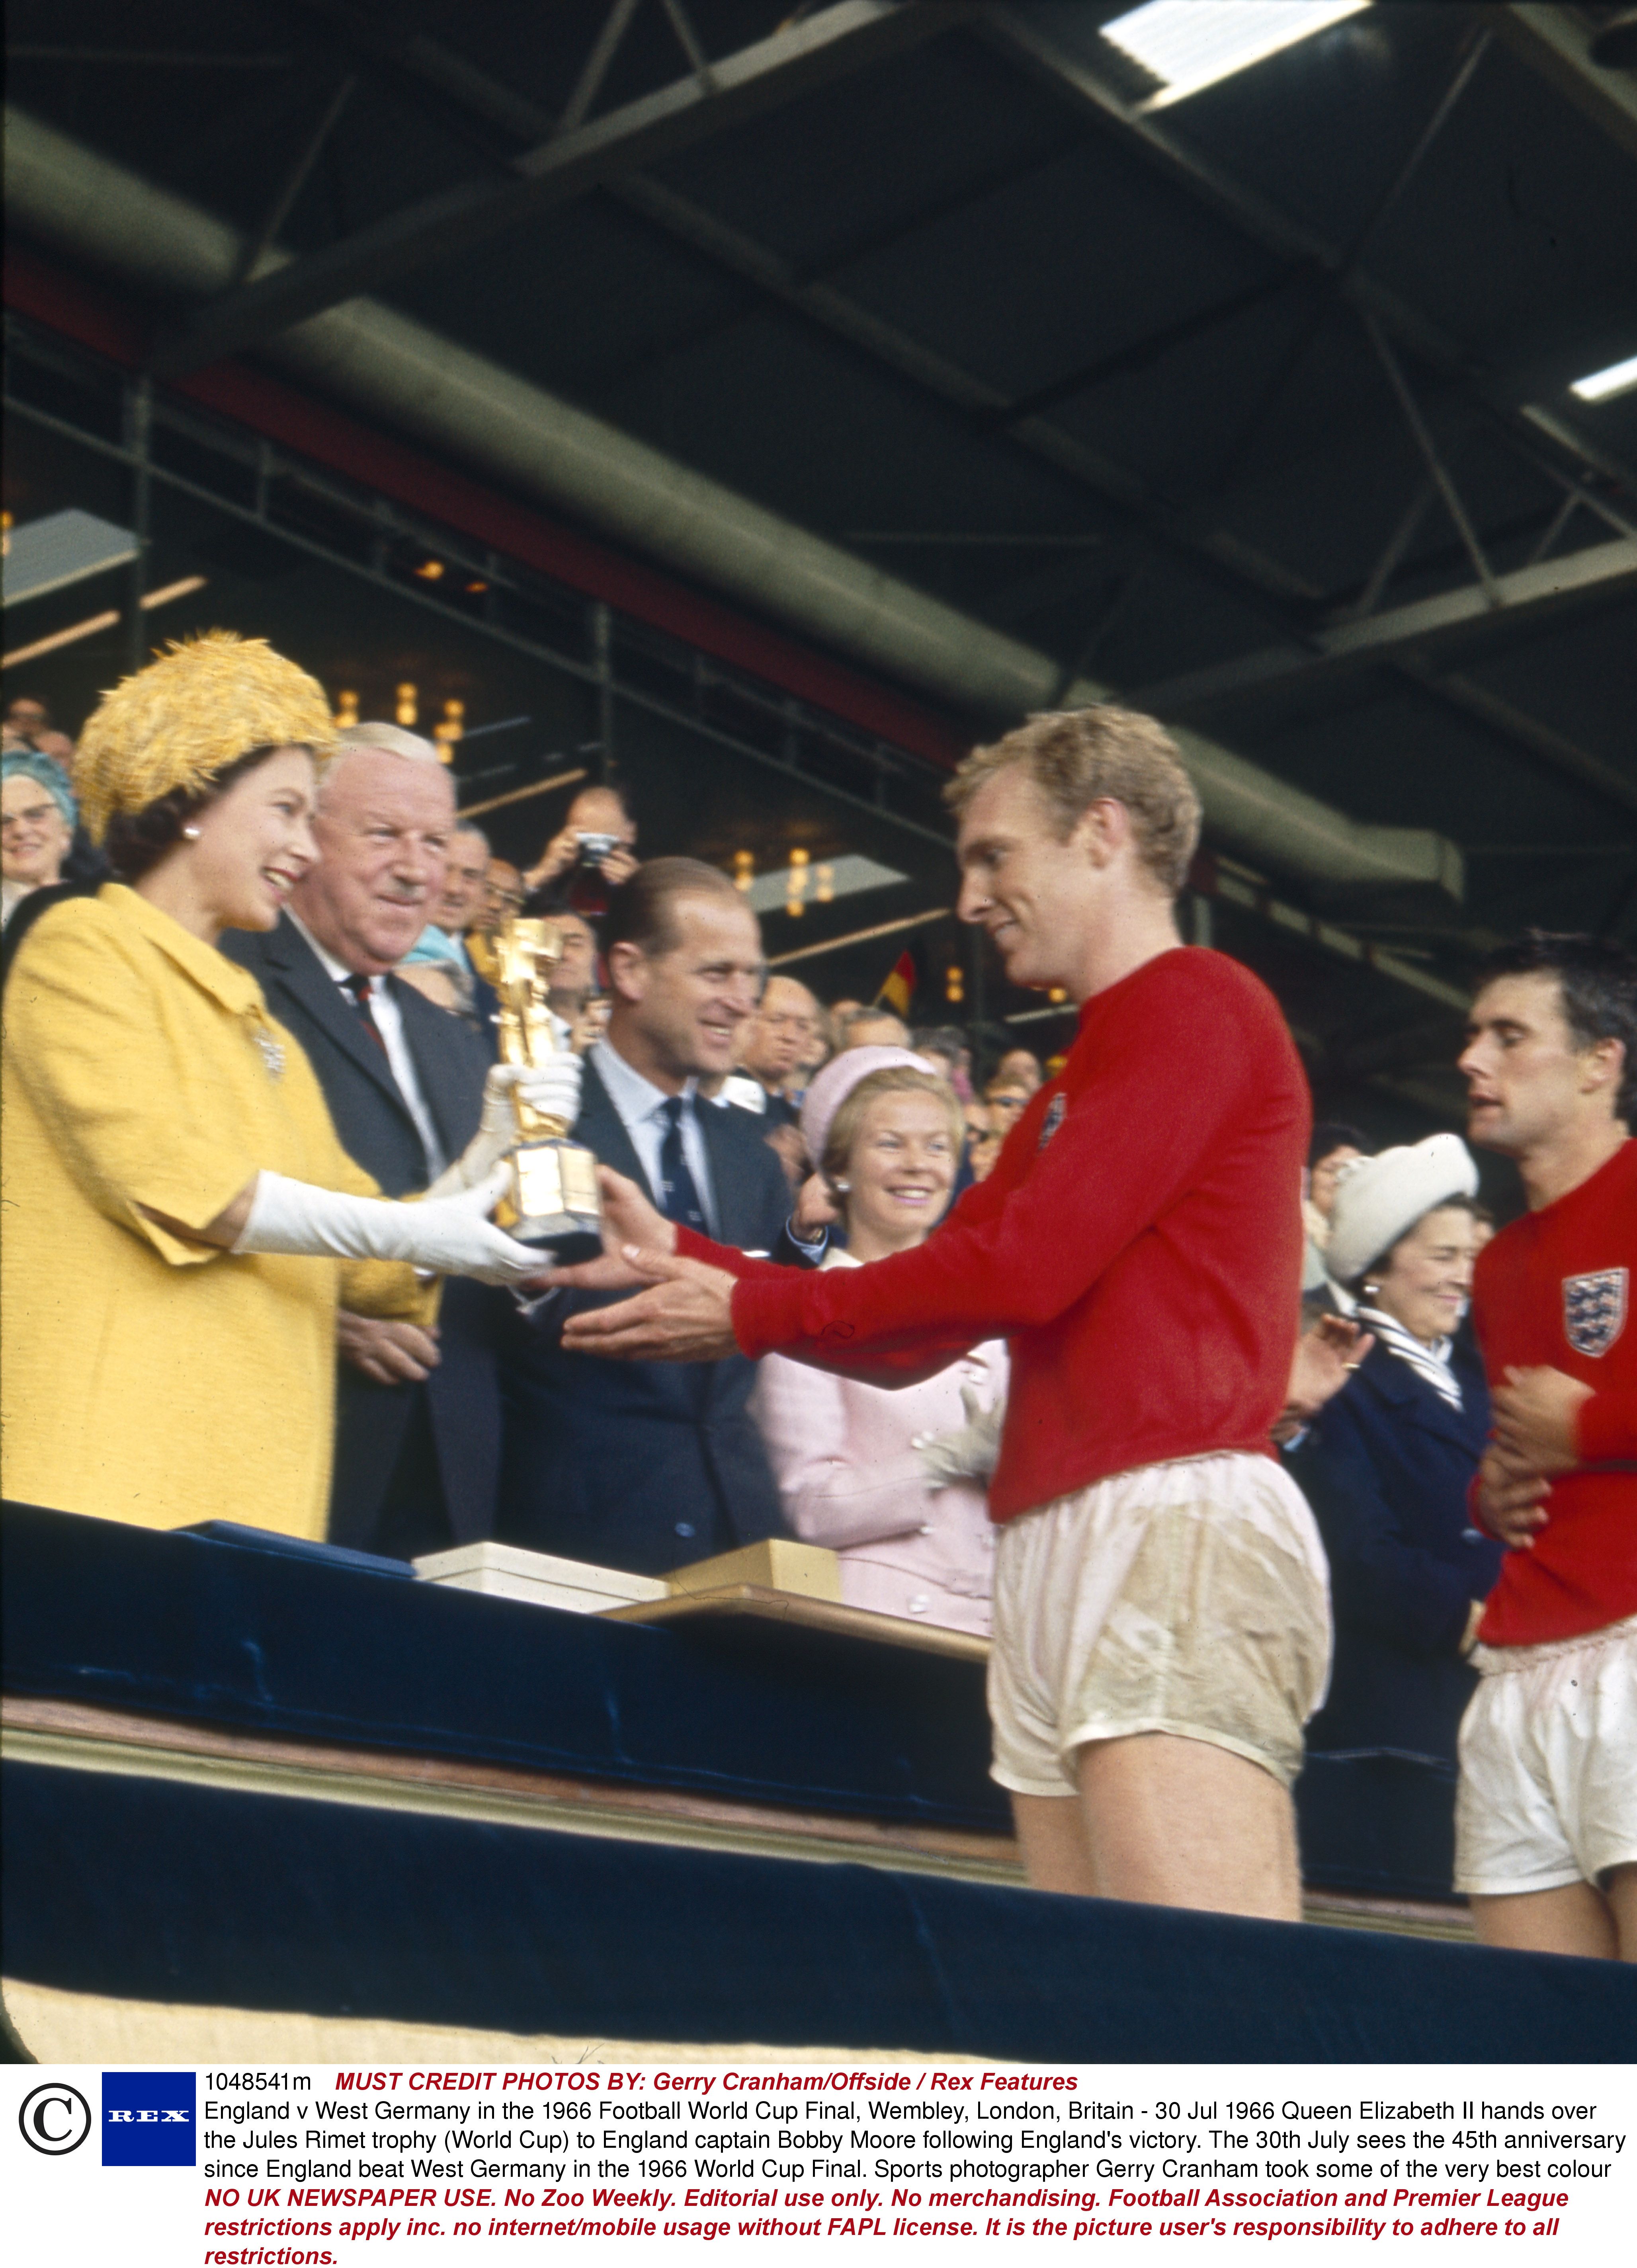 Watch Englands 1966 World Cup win live